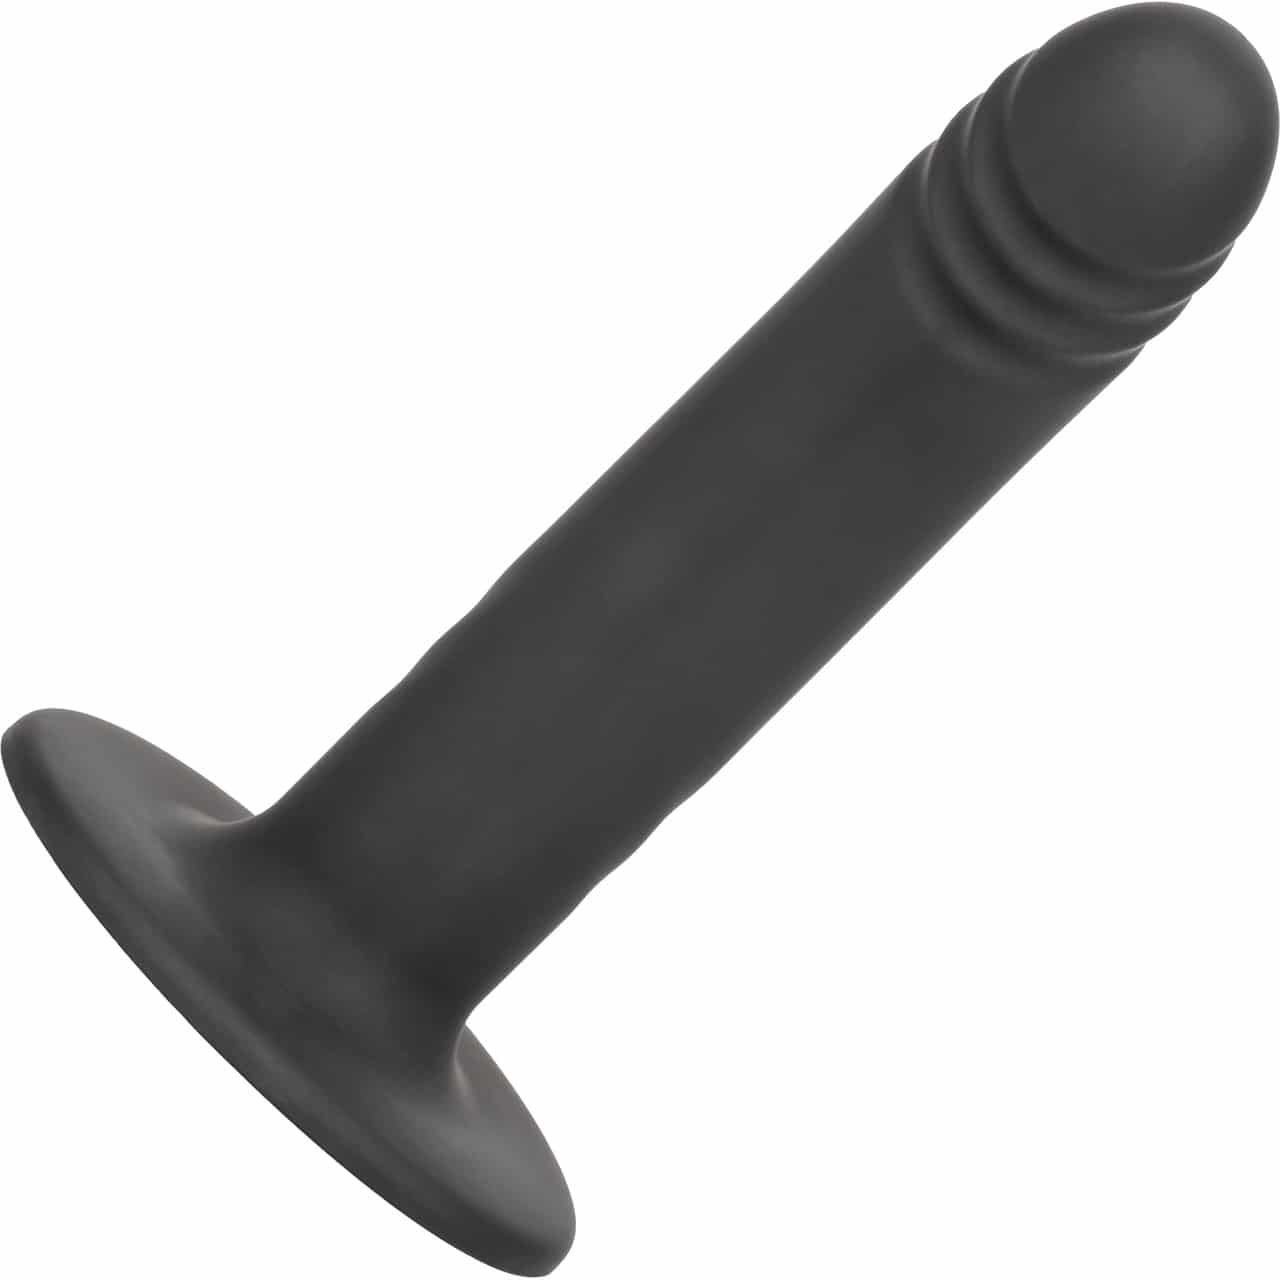 Boundless 6" Ridged Silicone Suction Cup Dildo. Slide 5